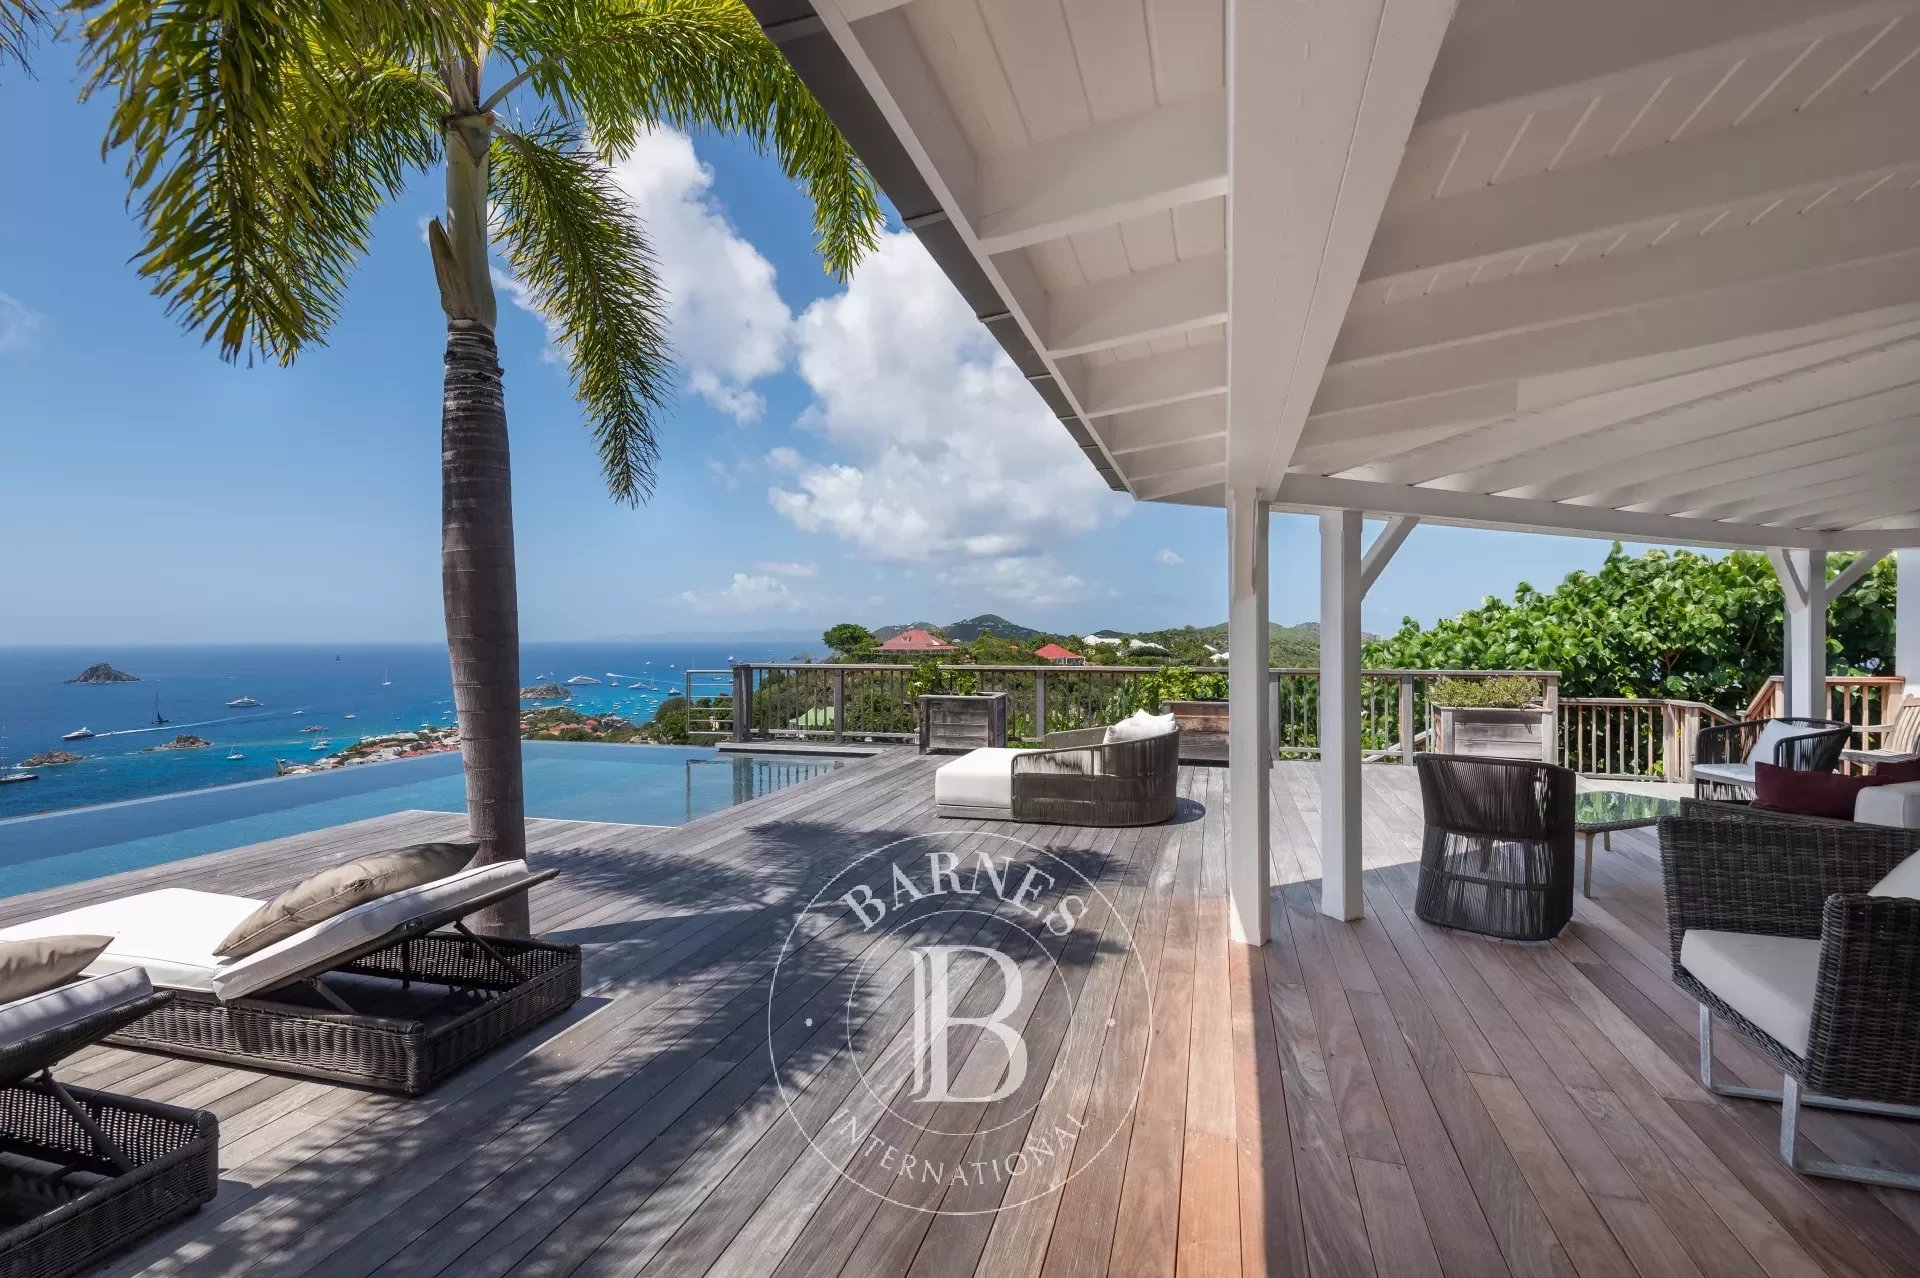 5-bedroom Villa in St Barths - picture 6 title=